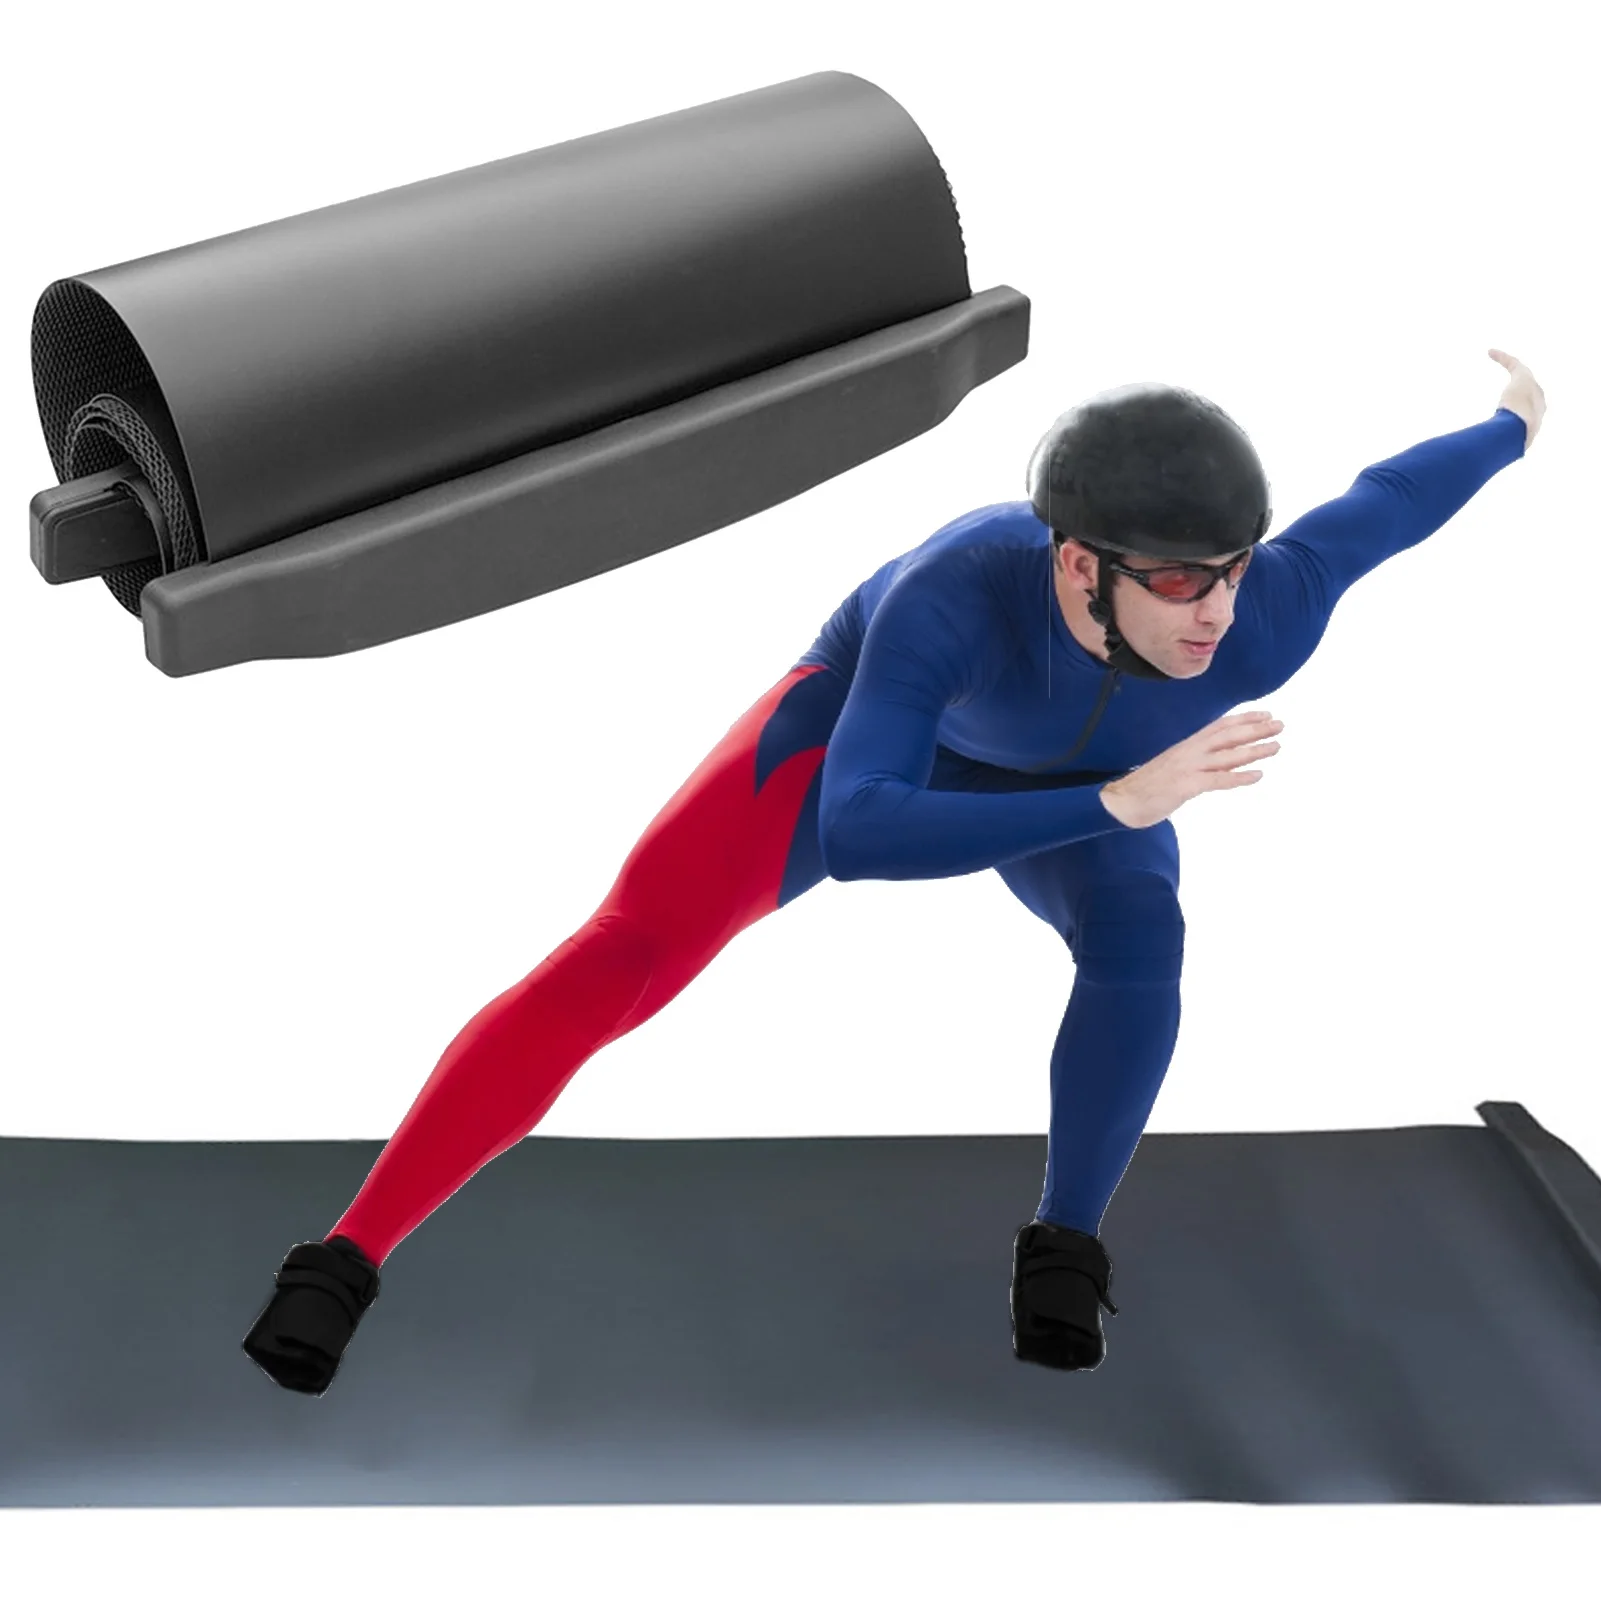 

1.8m High Quality Slide Board Portable Set Suit for Ice Hockey Roller Skating Training Home Fitness Exercise Accessories, Black,red